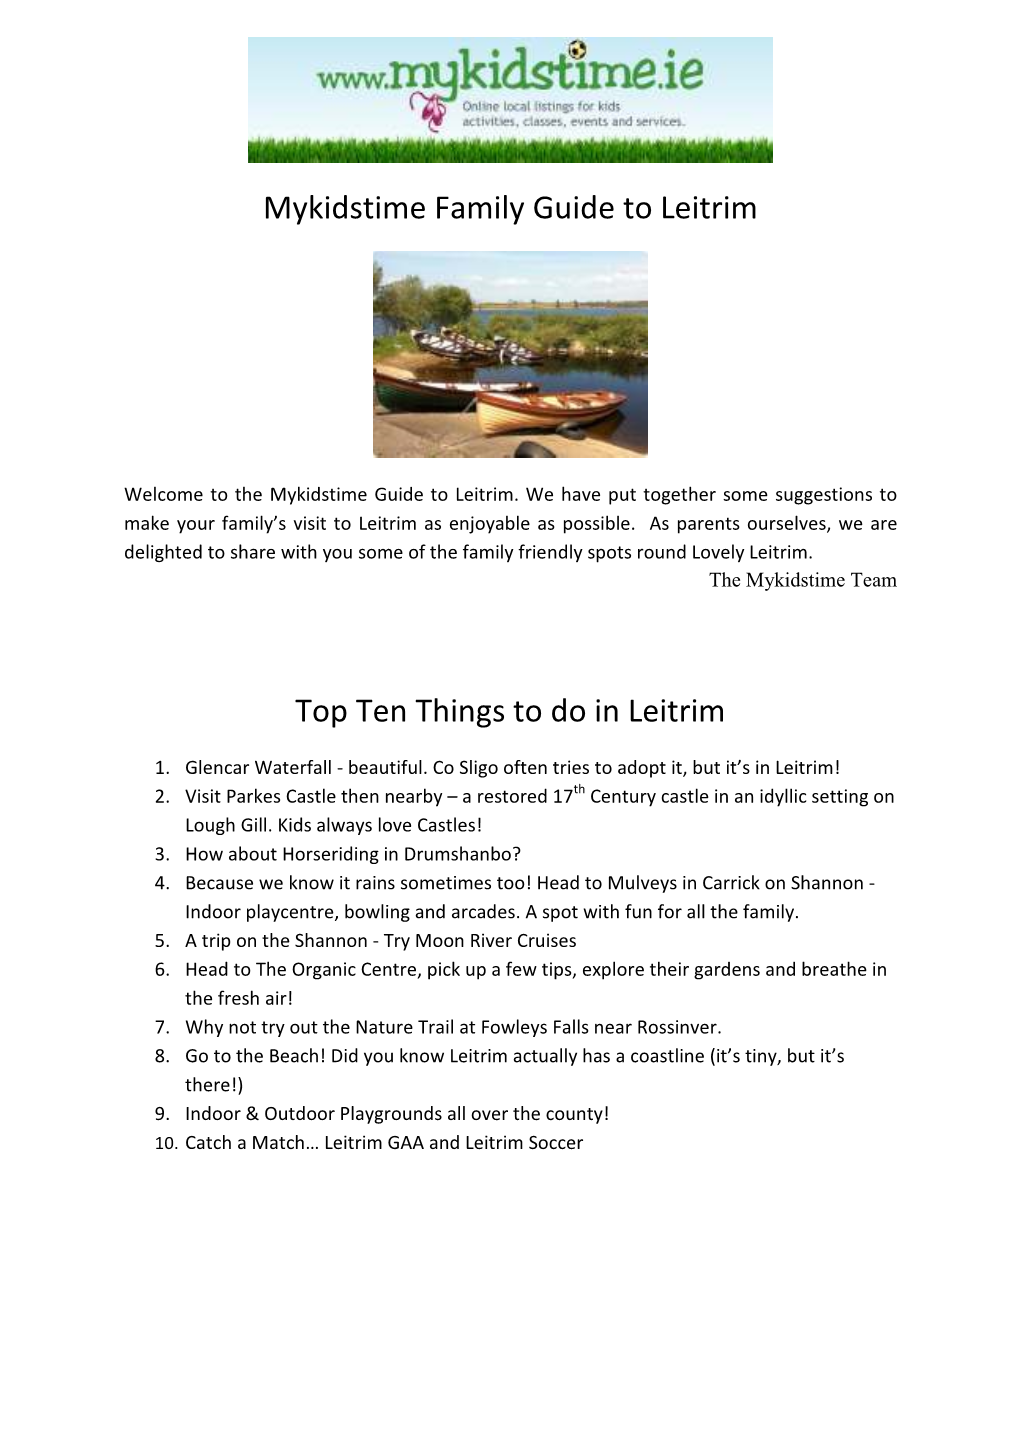 Mykidstime Family Guide to Leitrim Top Ten Things to Do in Leitrim